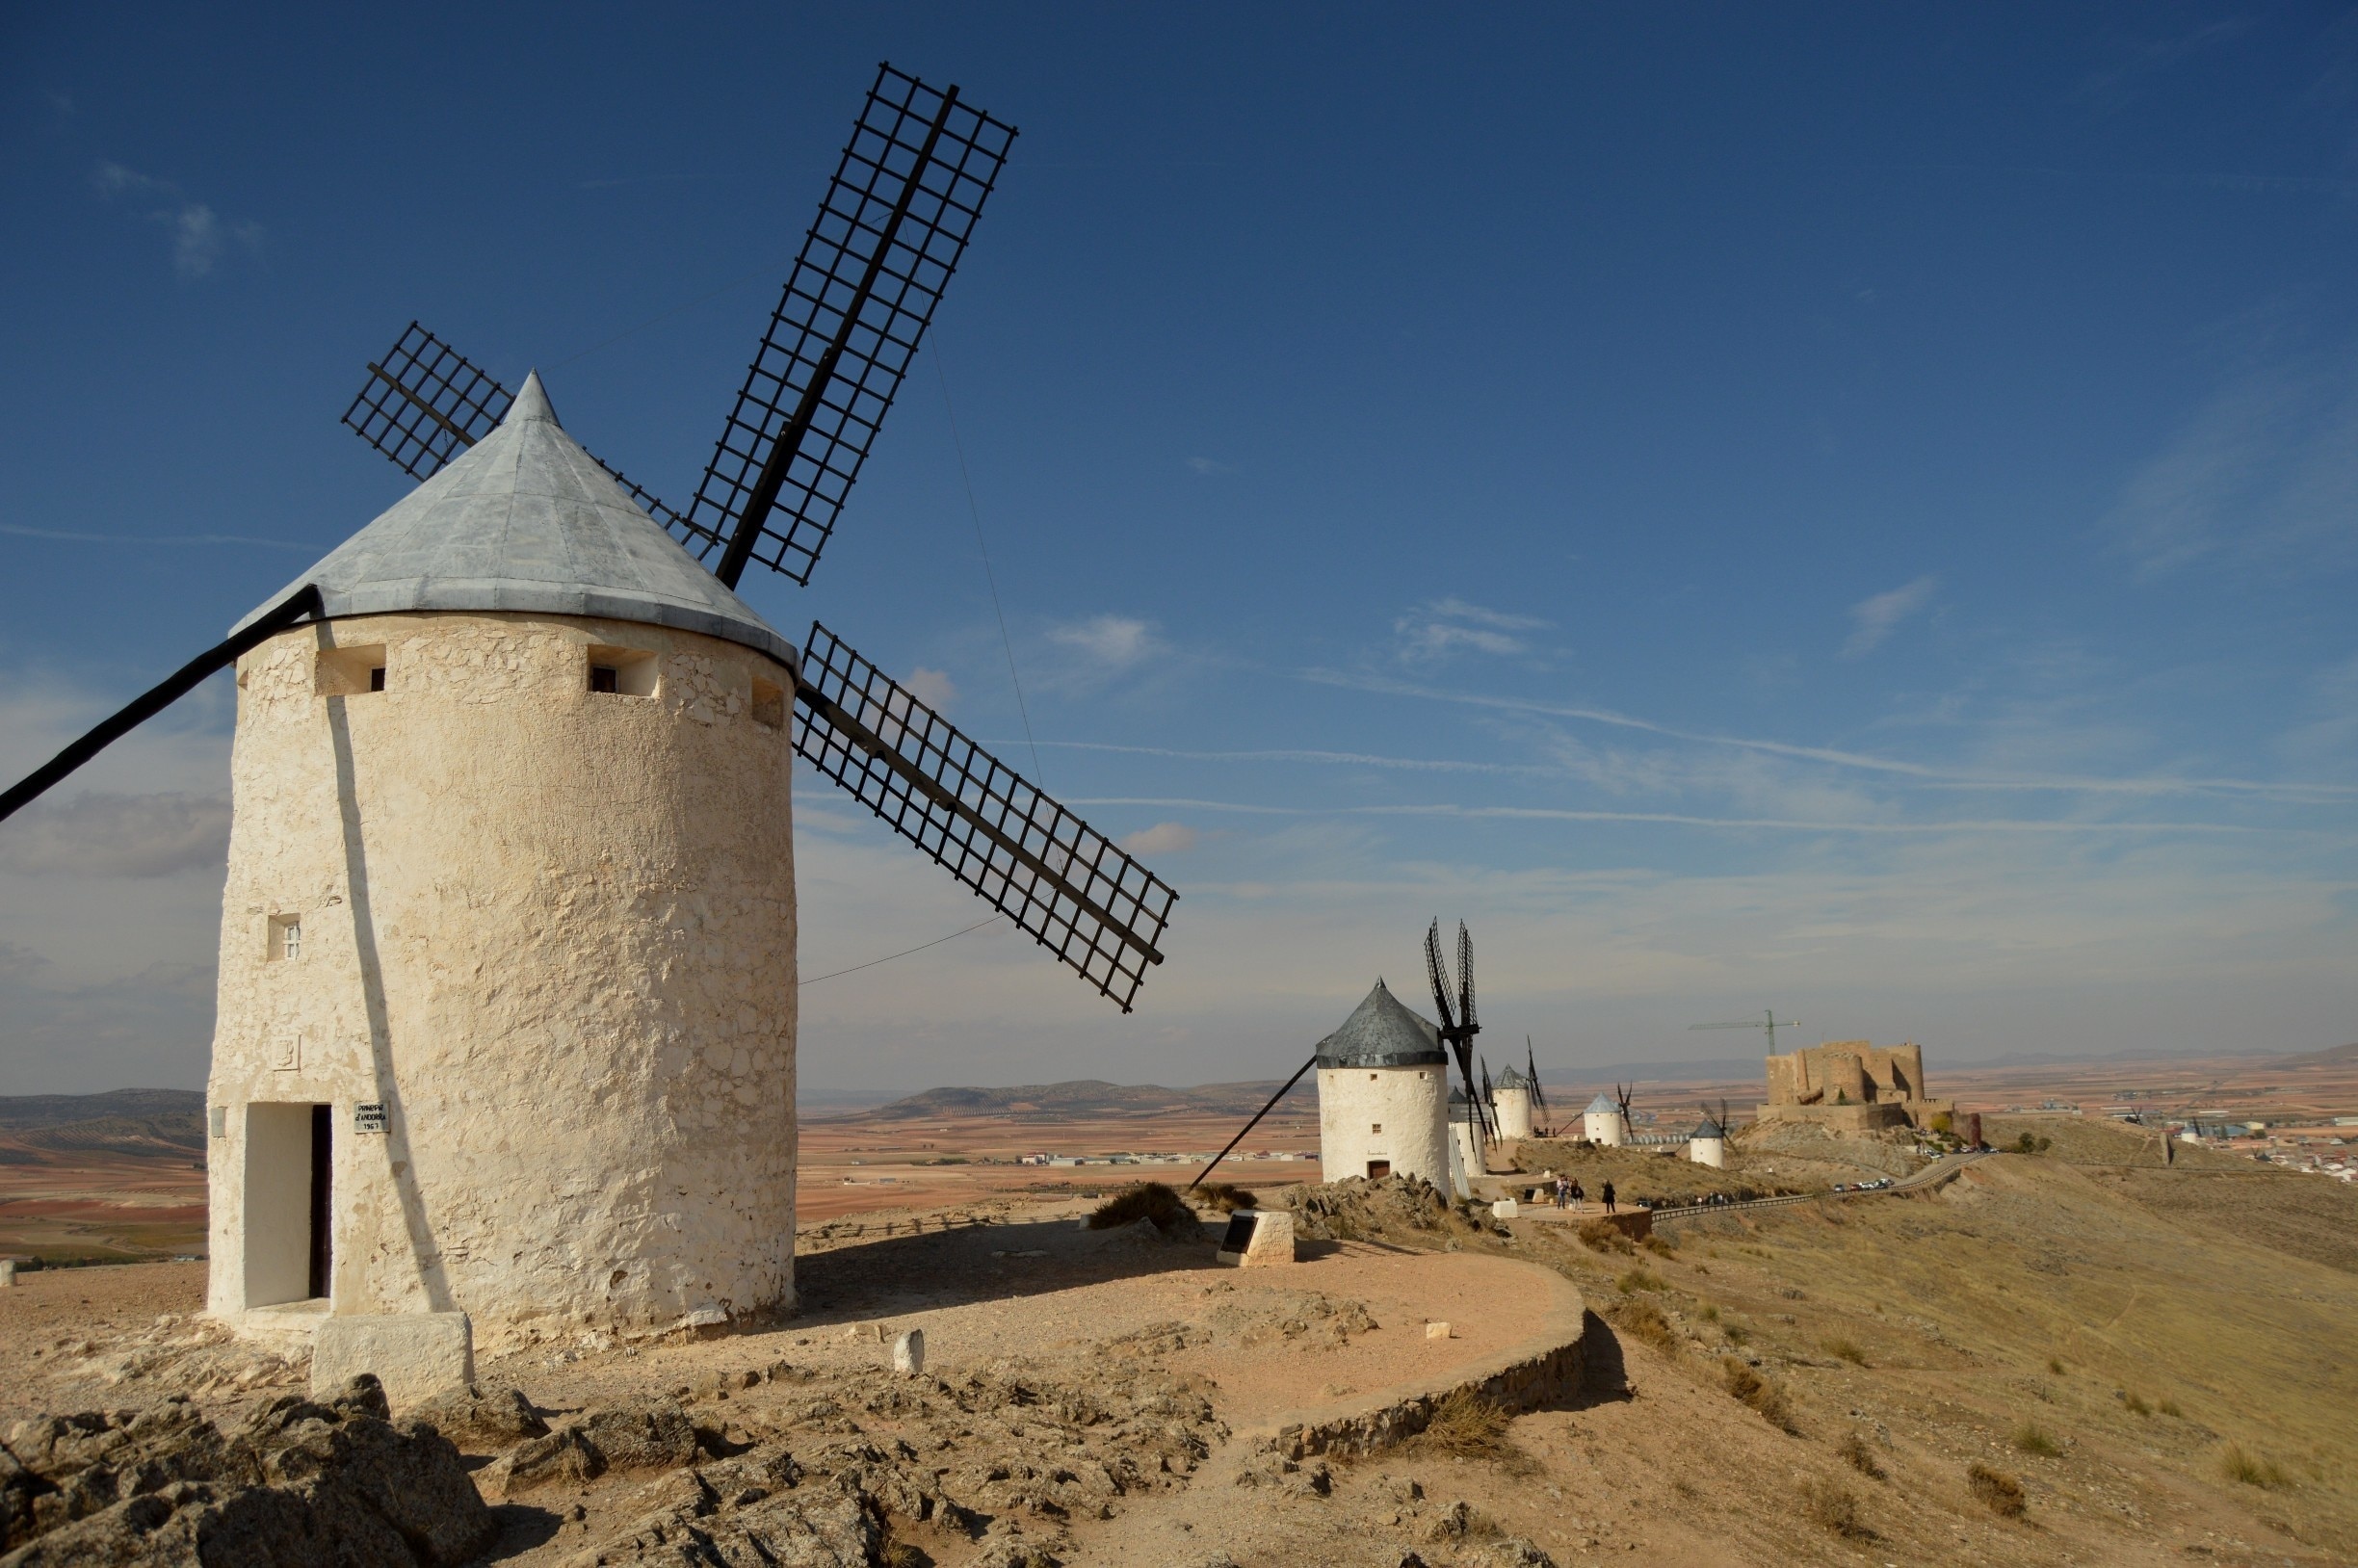 Consuegra is a little town about 150 km south of Madrid. It is known for its windmills referenced in Cervantes' Don Quixote.  Also, the views from the top of the mountain on which they stand are spectacular. #troveon